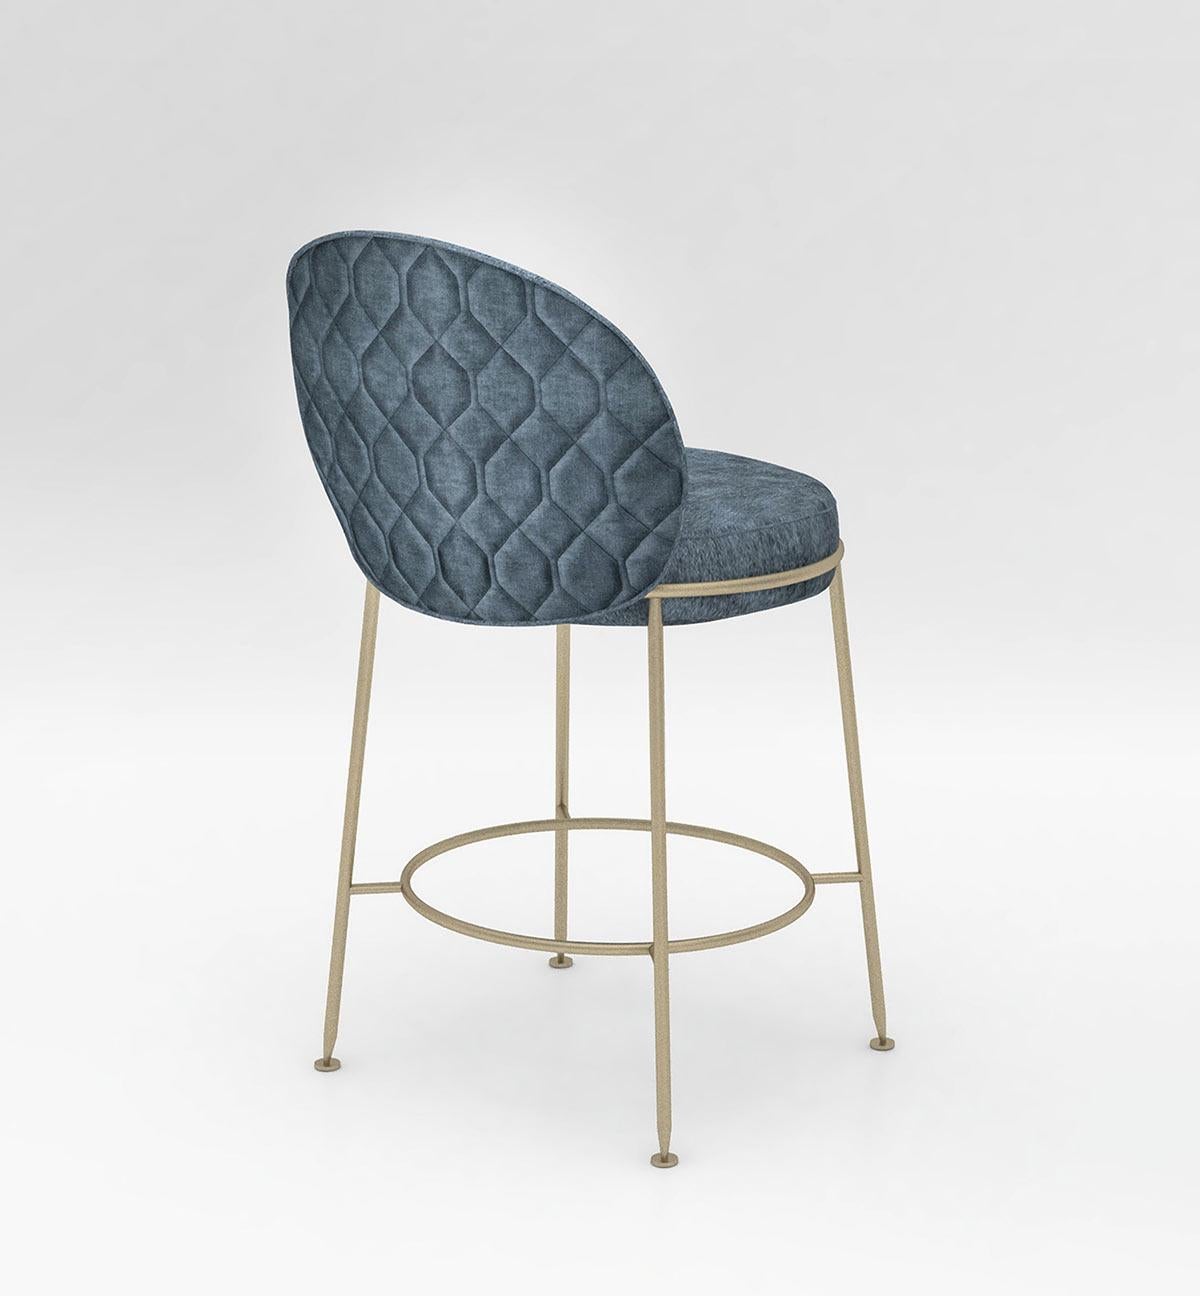 Other Beatiful Barstool Amaretto Collection Available in Different Colors For Sale